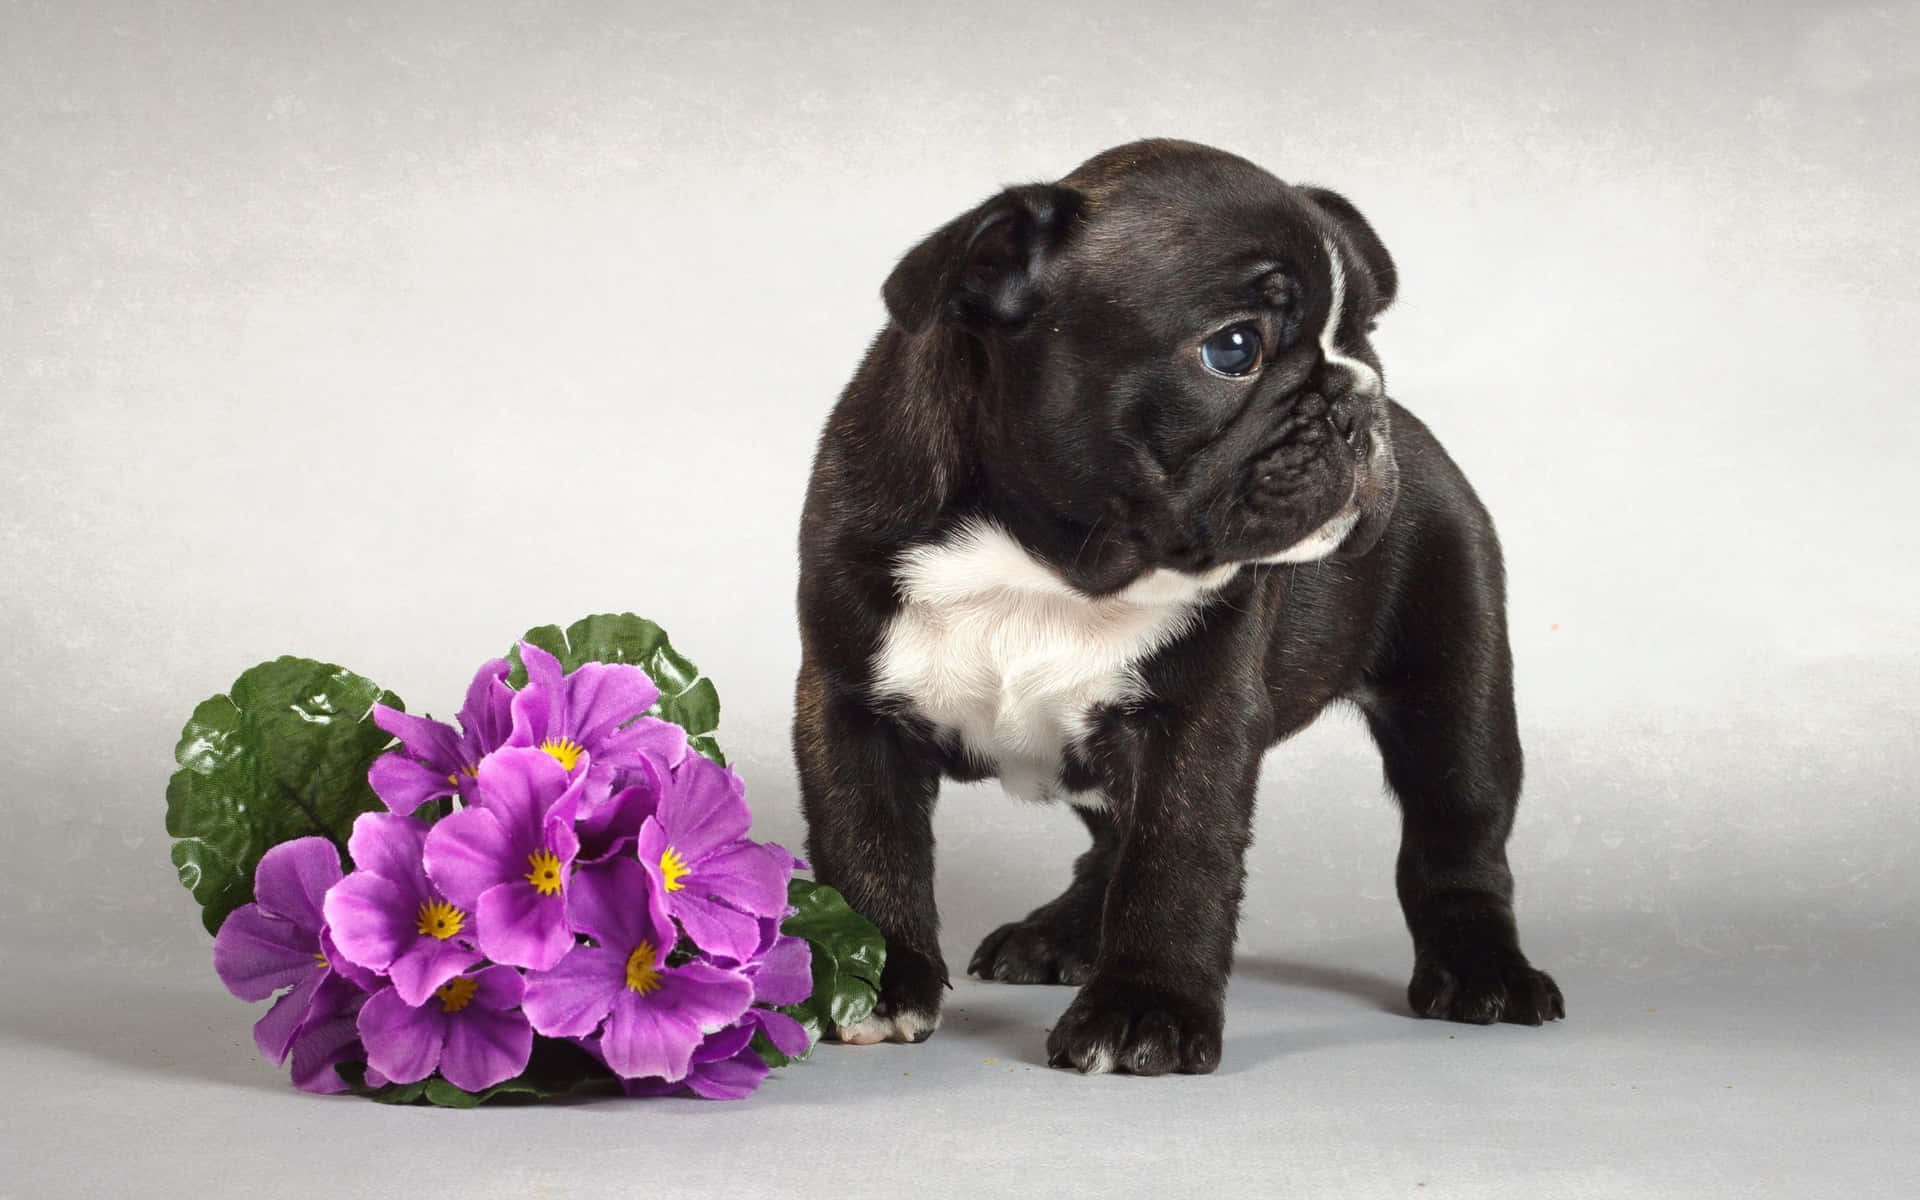 Adorable Puppy Bulldog Charms with its Playful Gaze